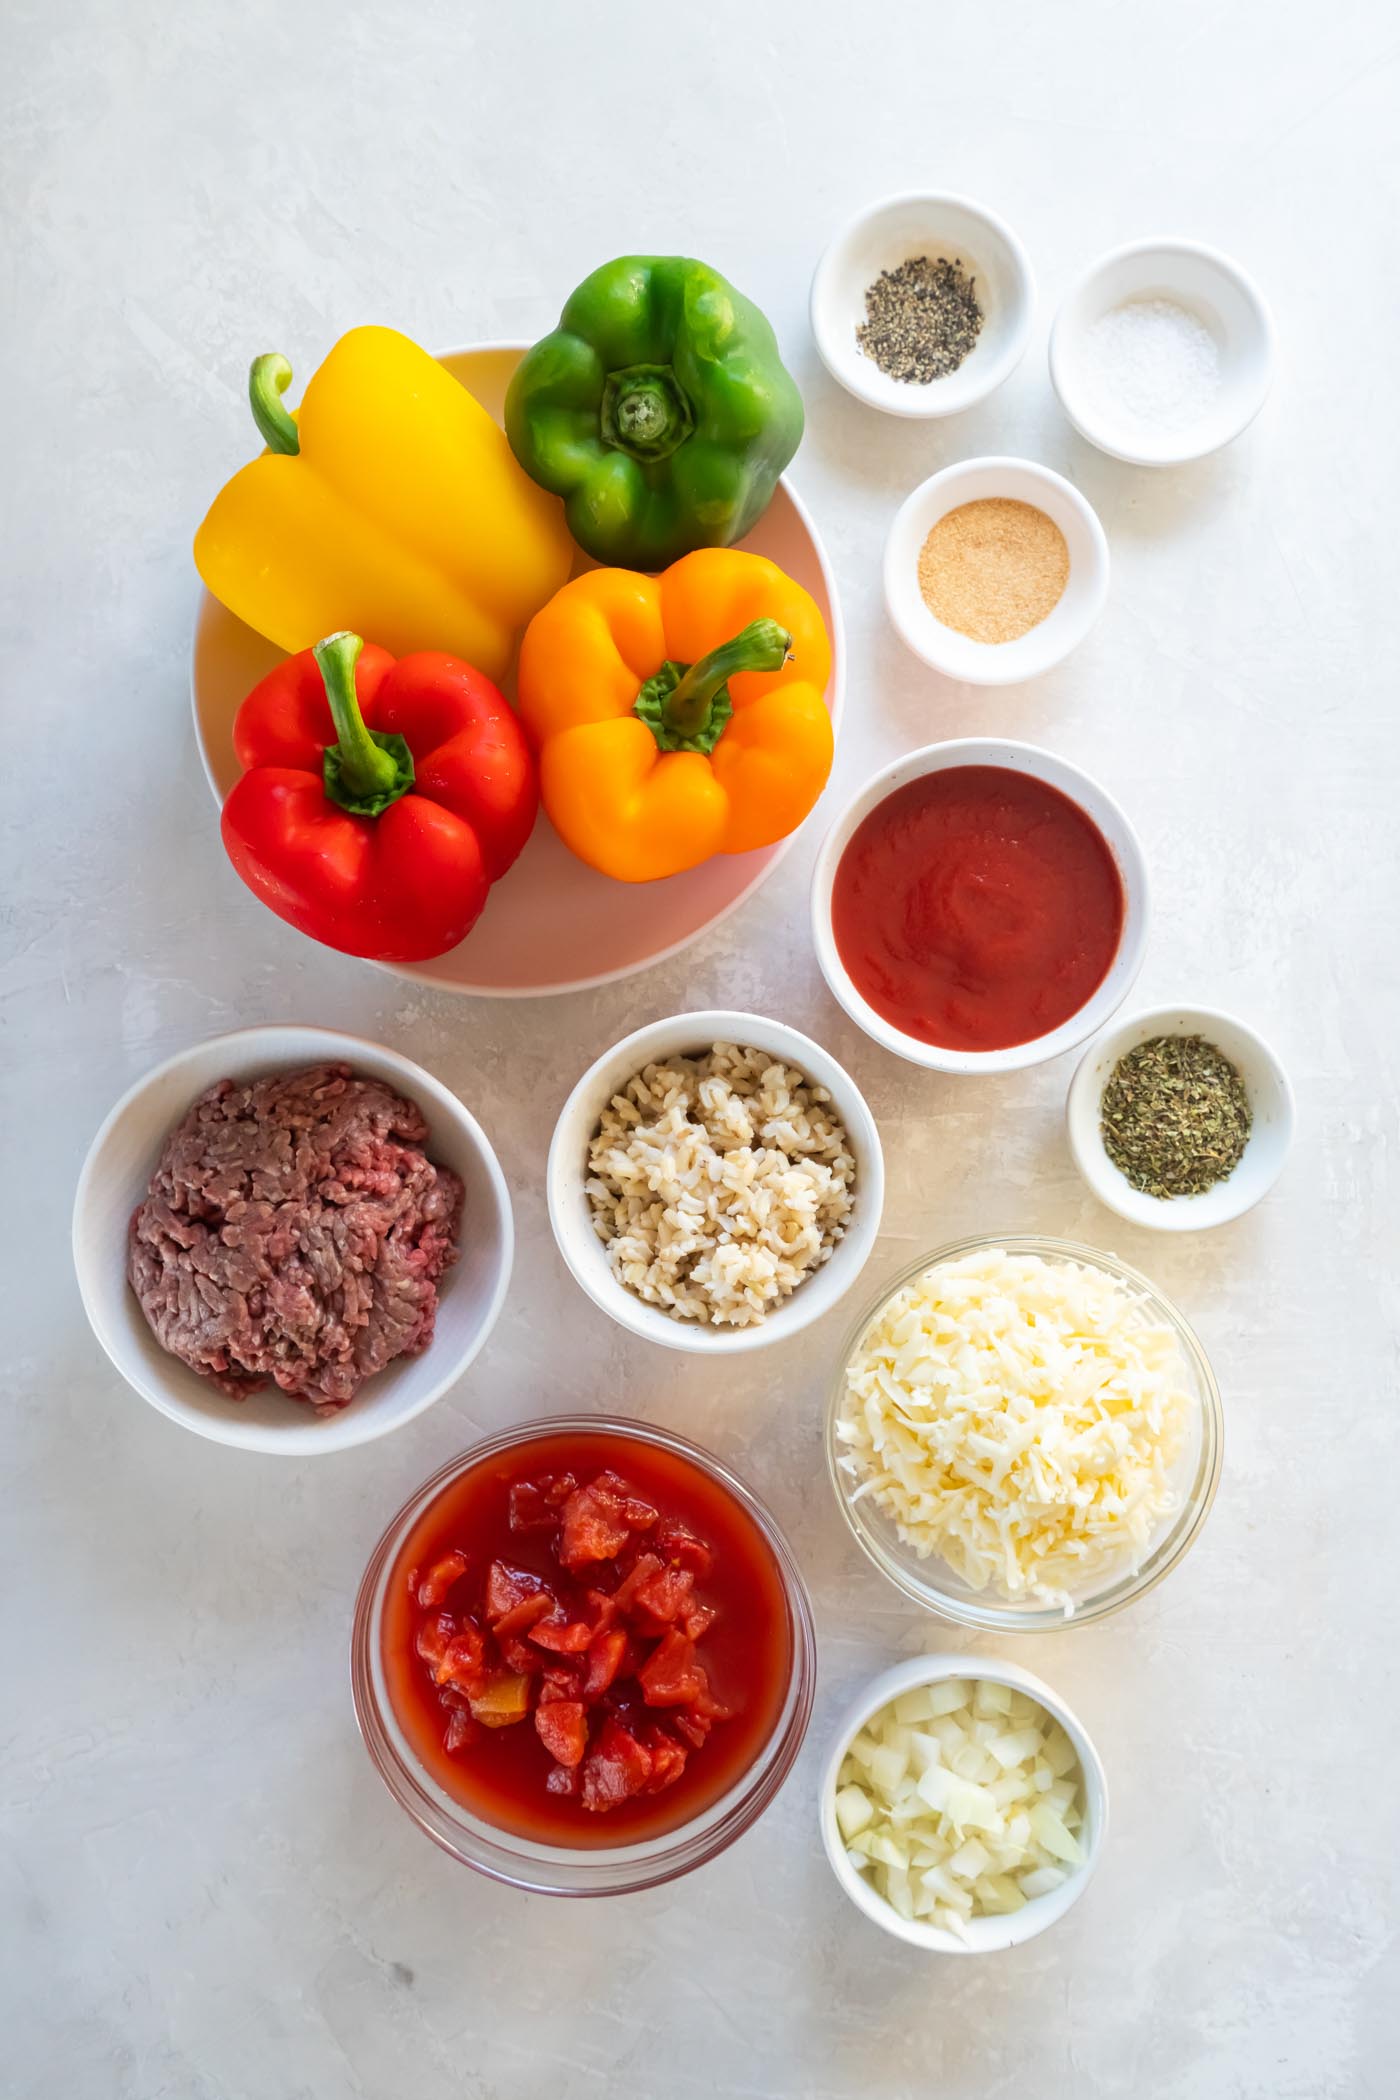 Ingredients for instant pot stuffed peppers recipe.